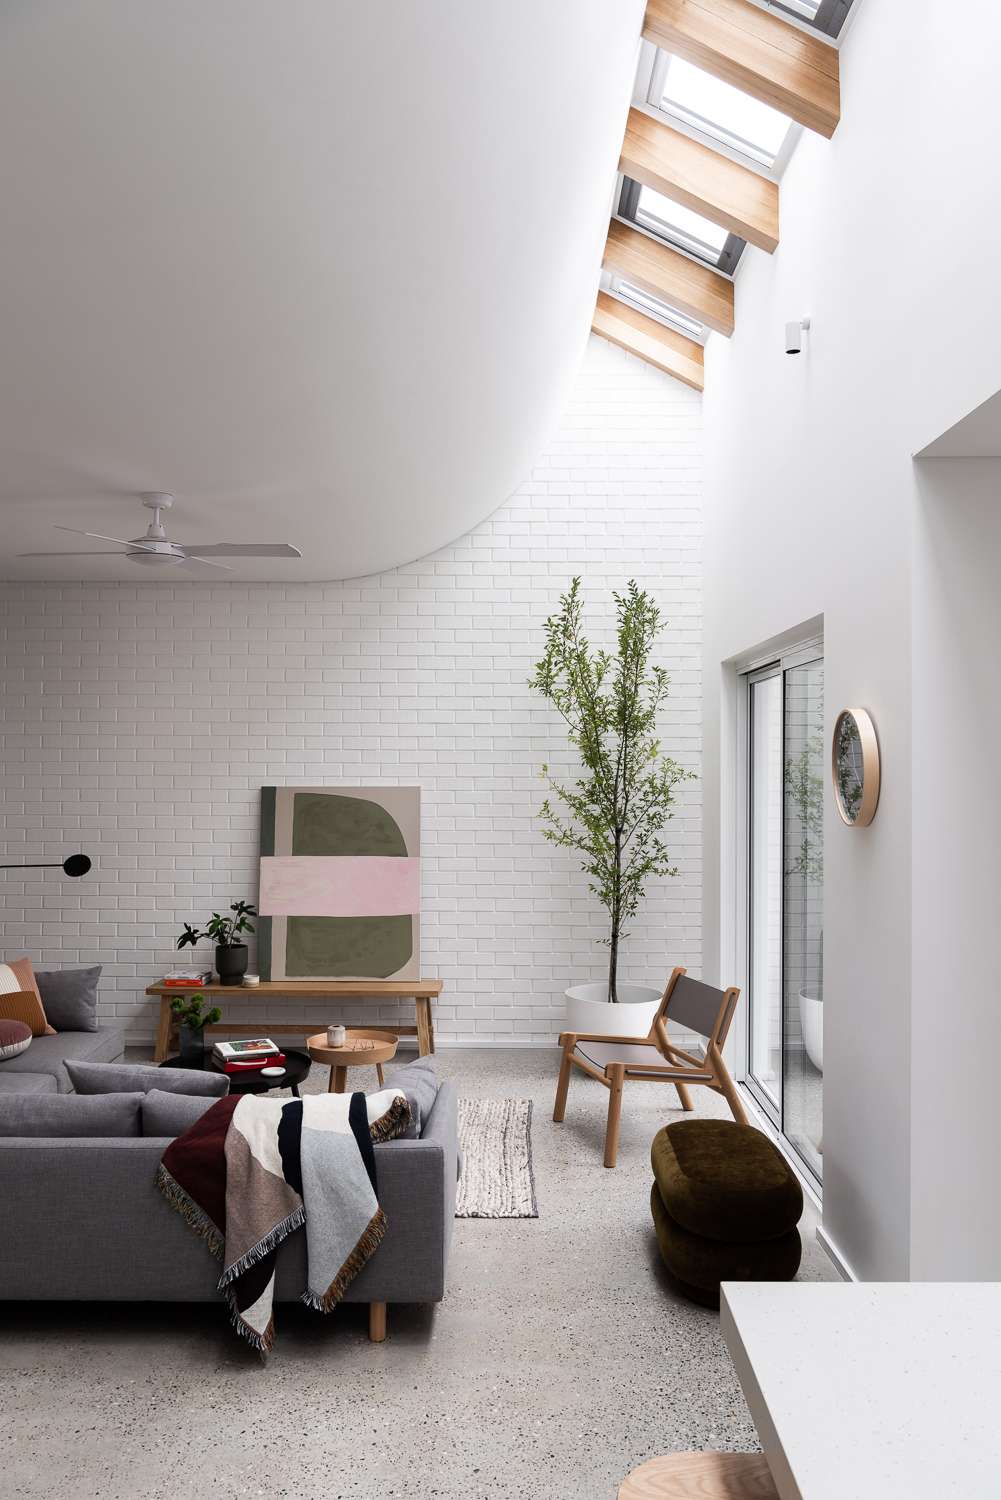 The Third by Dalecki Design showing interior space with large skylight